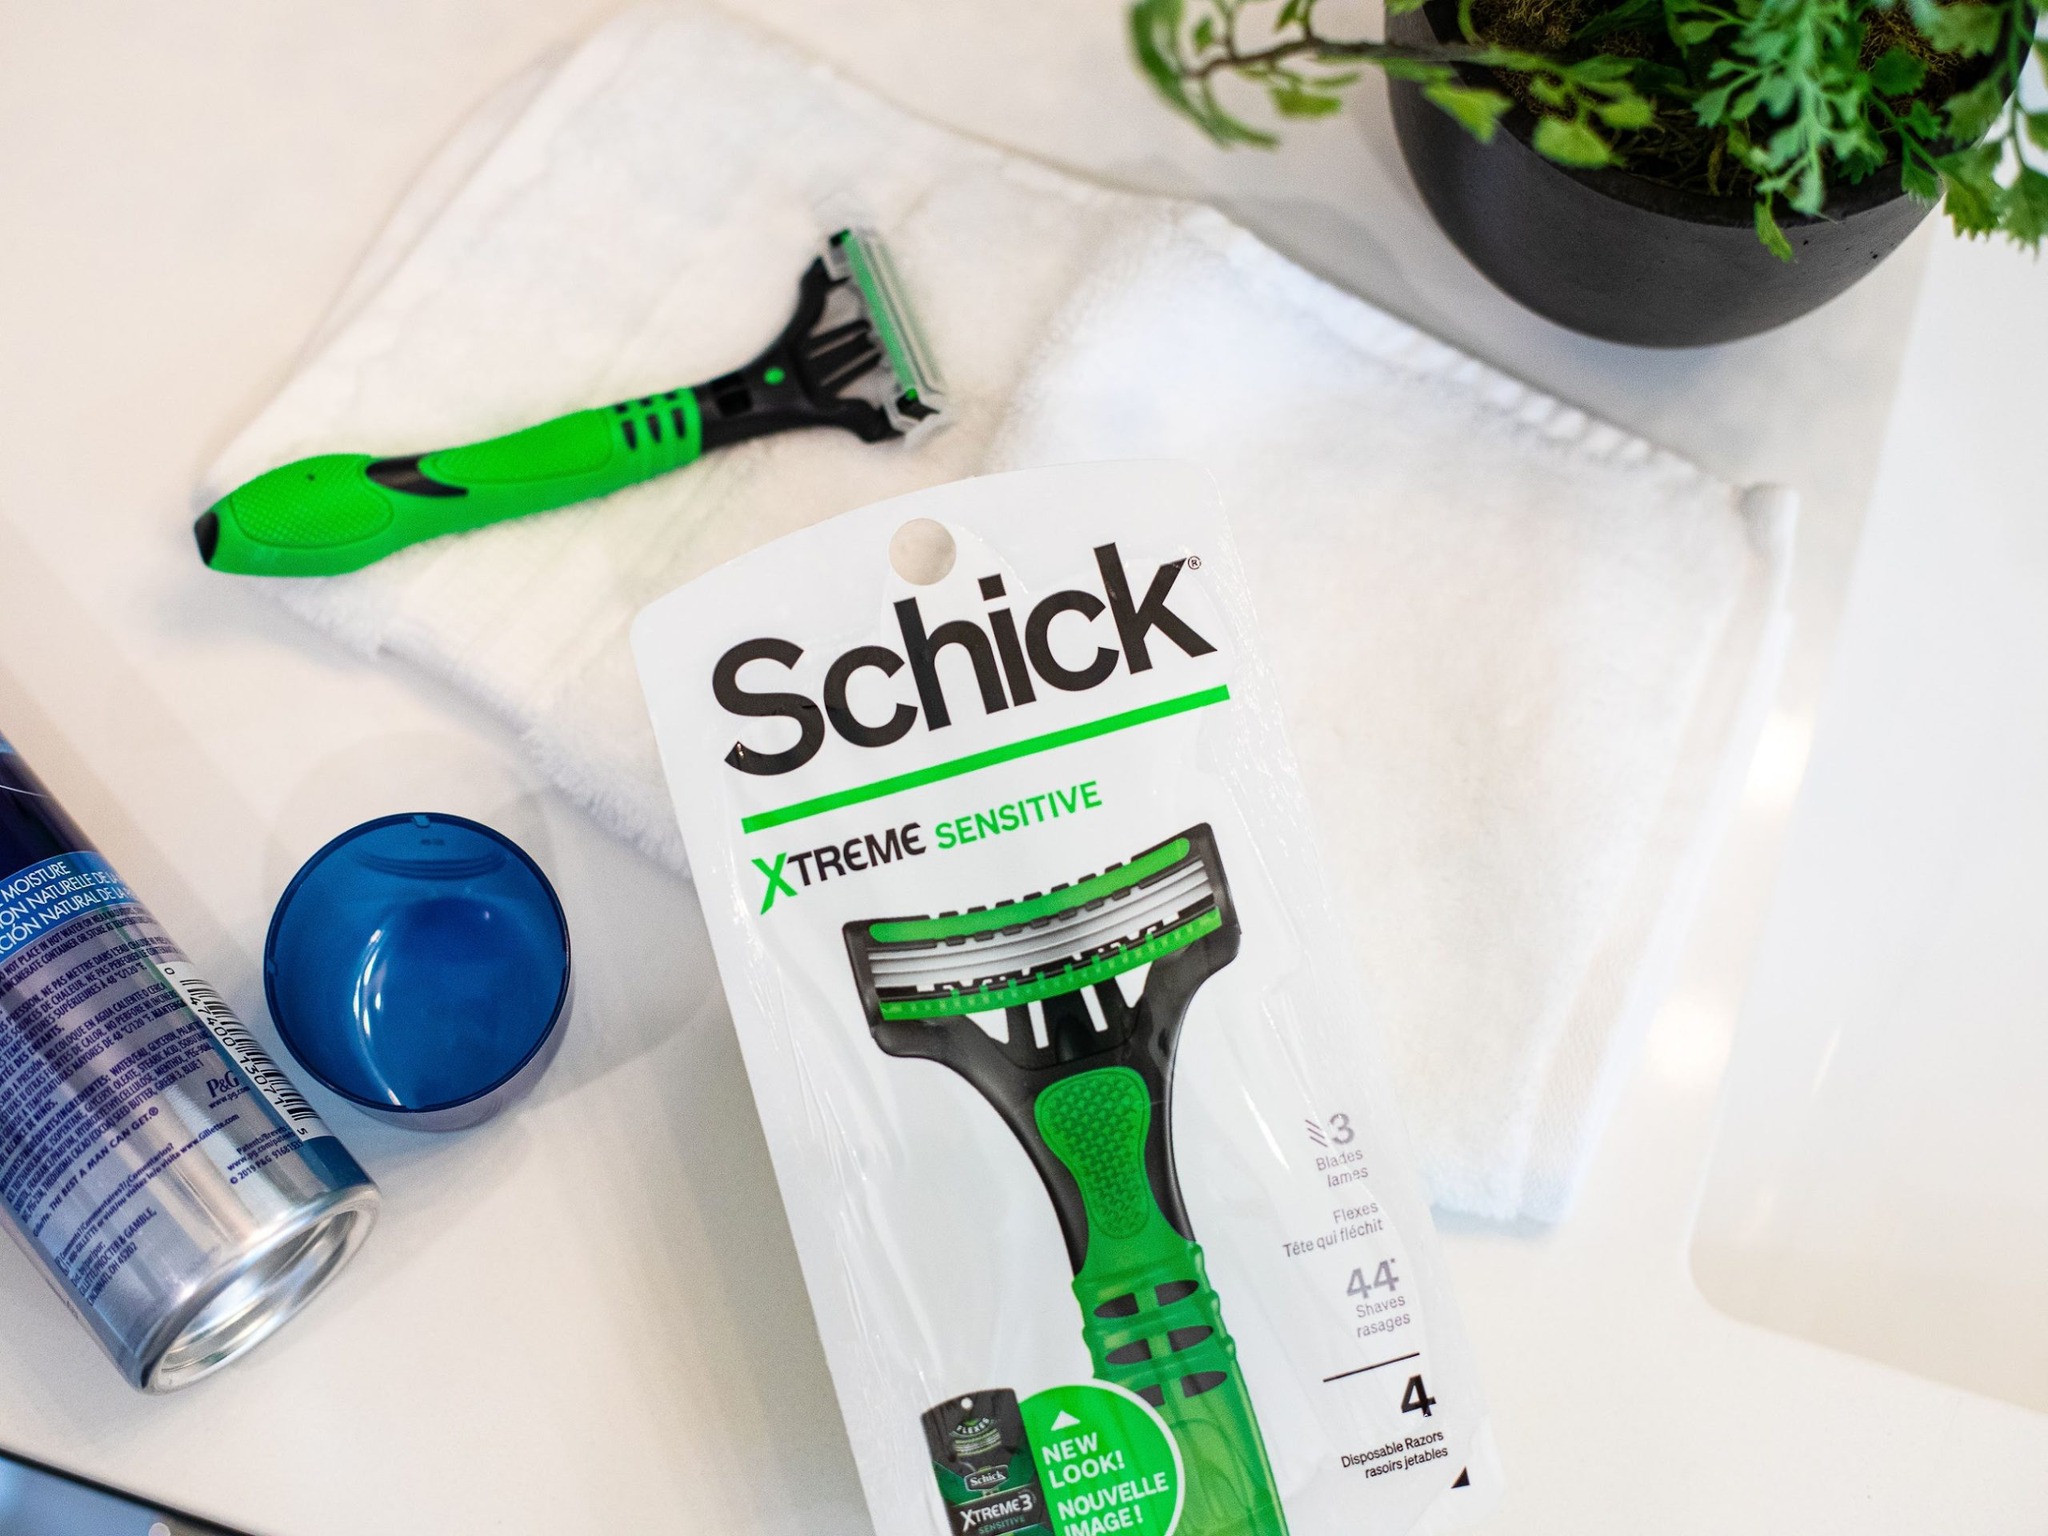 Grab Schick or Skintimate Disposable Razors For As Low As 10¢ At Kroger